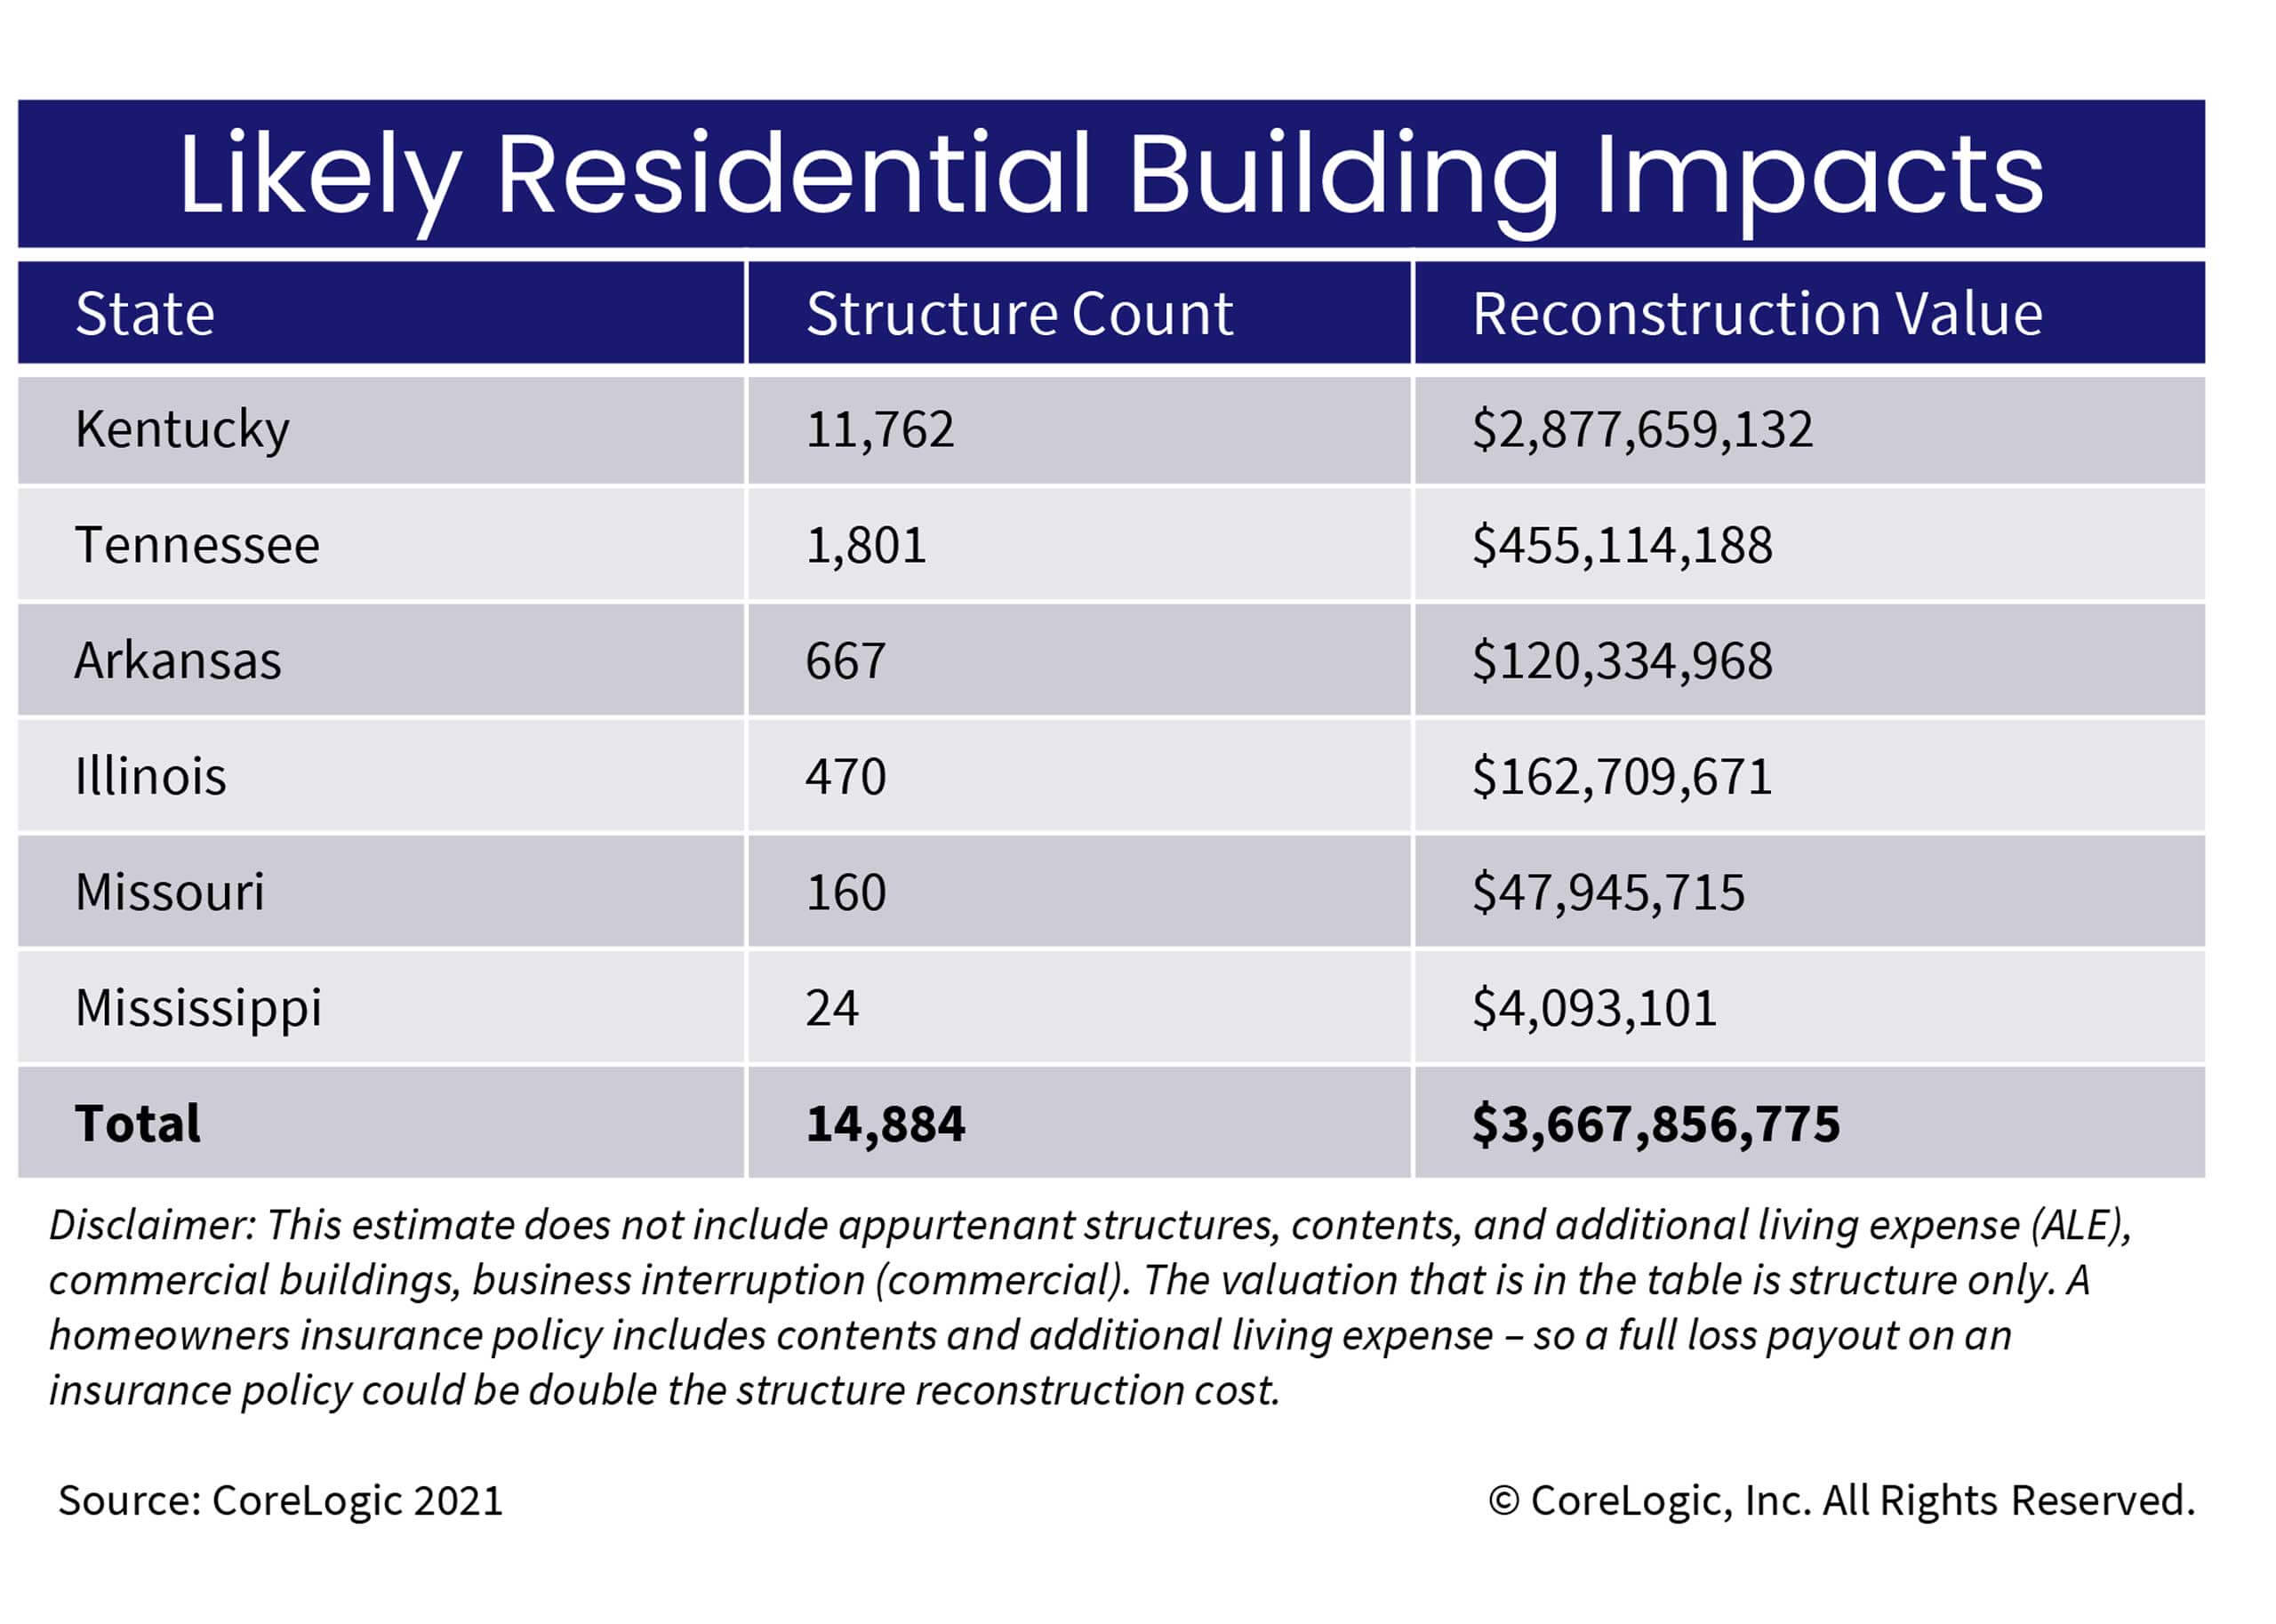 Chart displaying likely residential building impacts